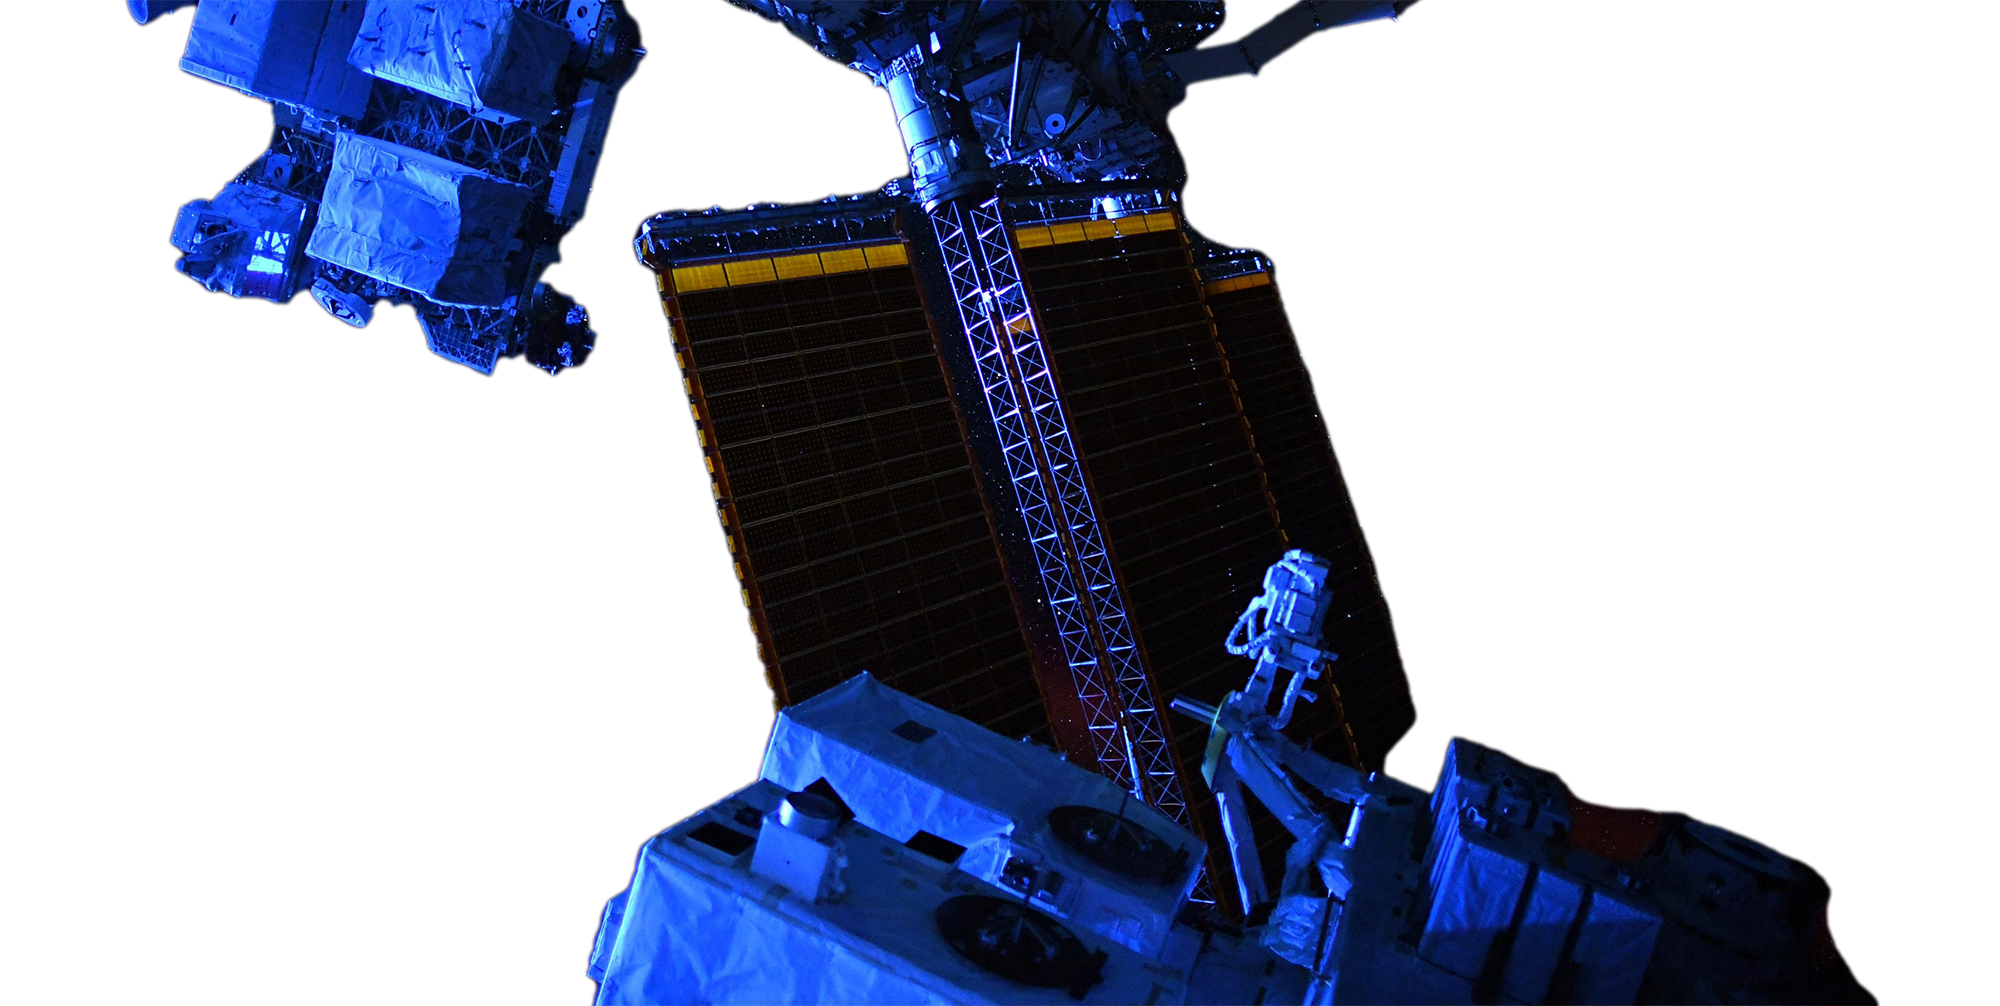 H5 on ISS at night in orbit